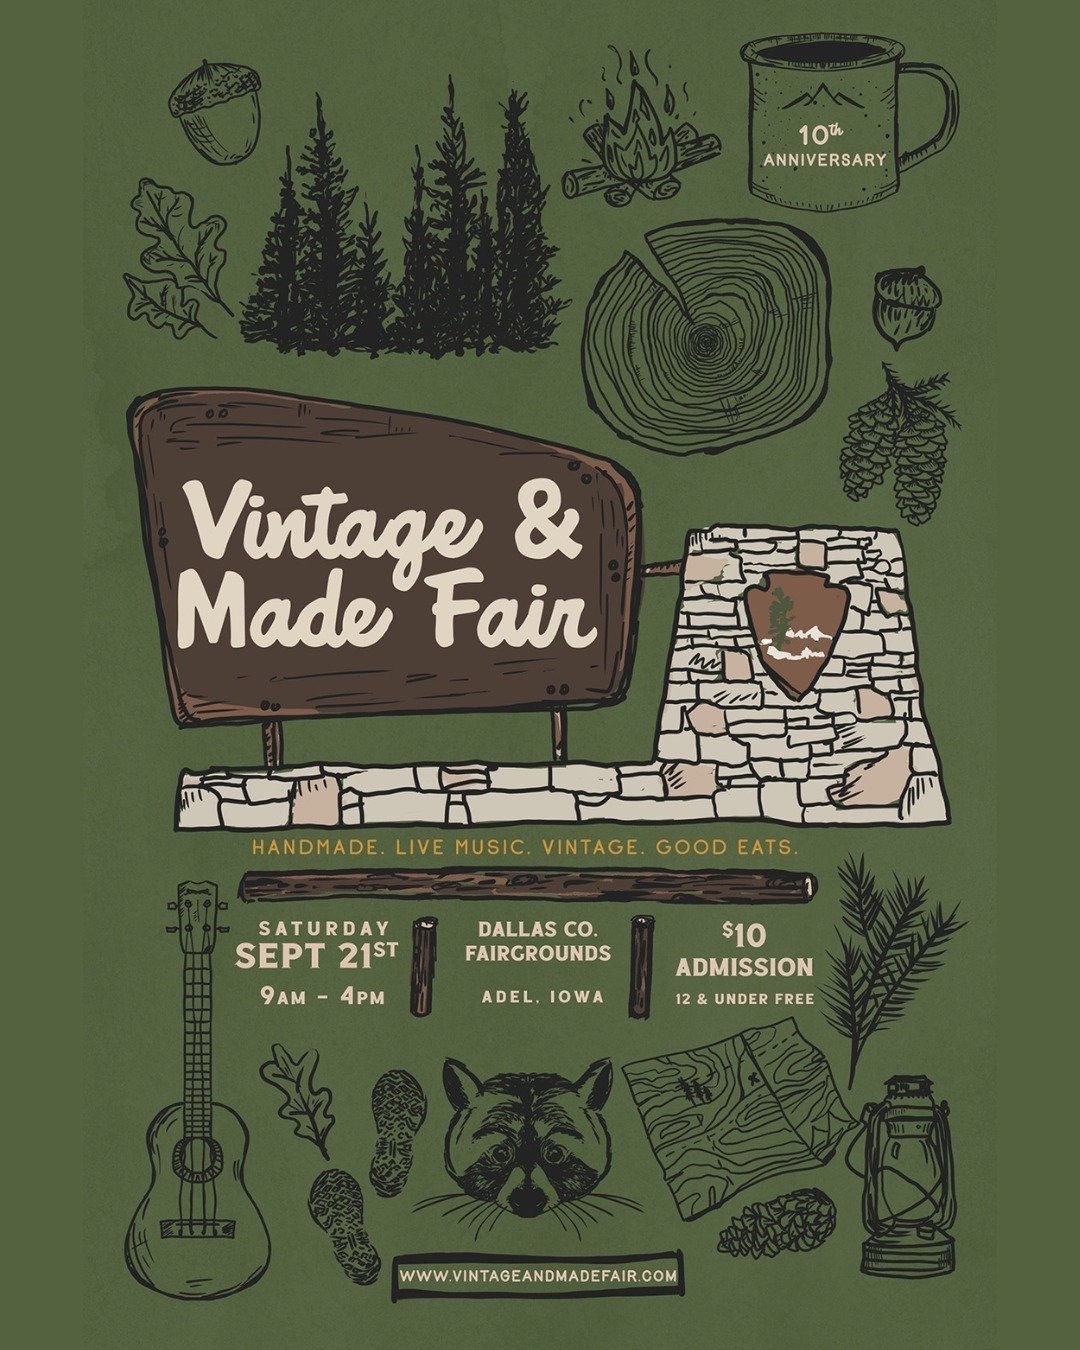 Calling all adventurers! 🏔🌲

We are thrilled to announce that the theme for the 2024 Vintage &amp; Made Fair! Join us for a day of exploration and discovery on September 21st in Adel, Iowa.

Learn more here 👉 www.vintageandmadefair.com/event-detai